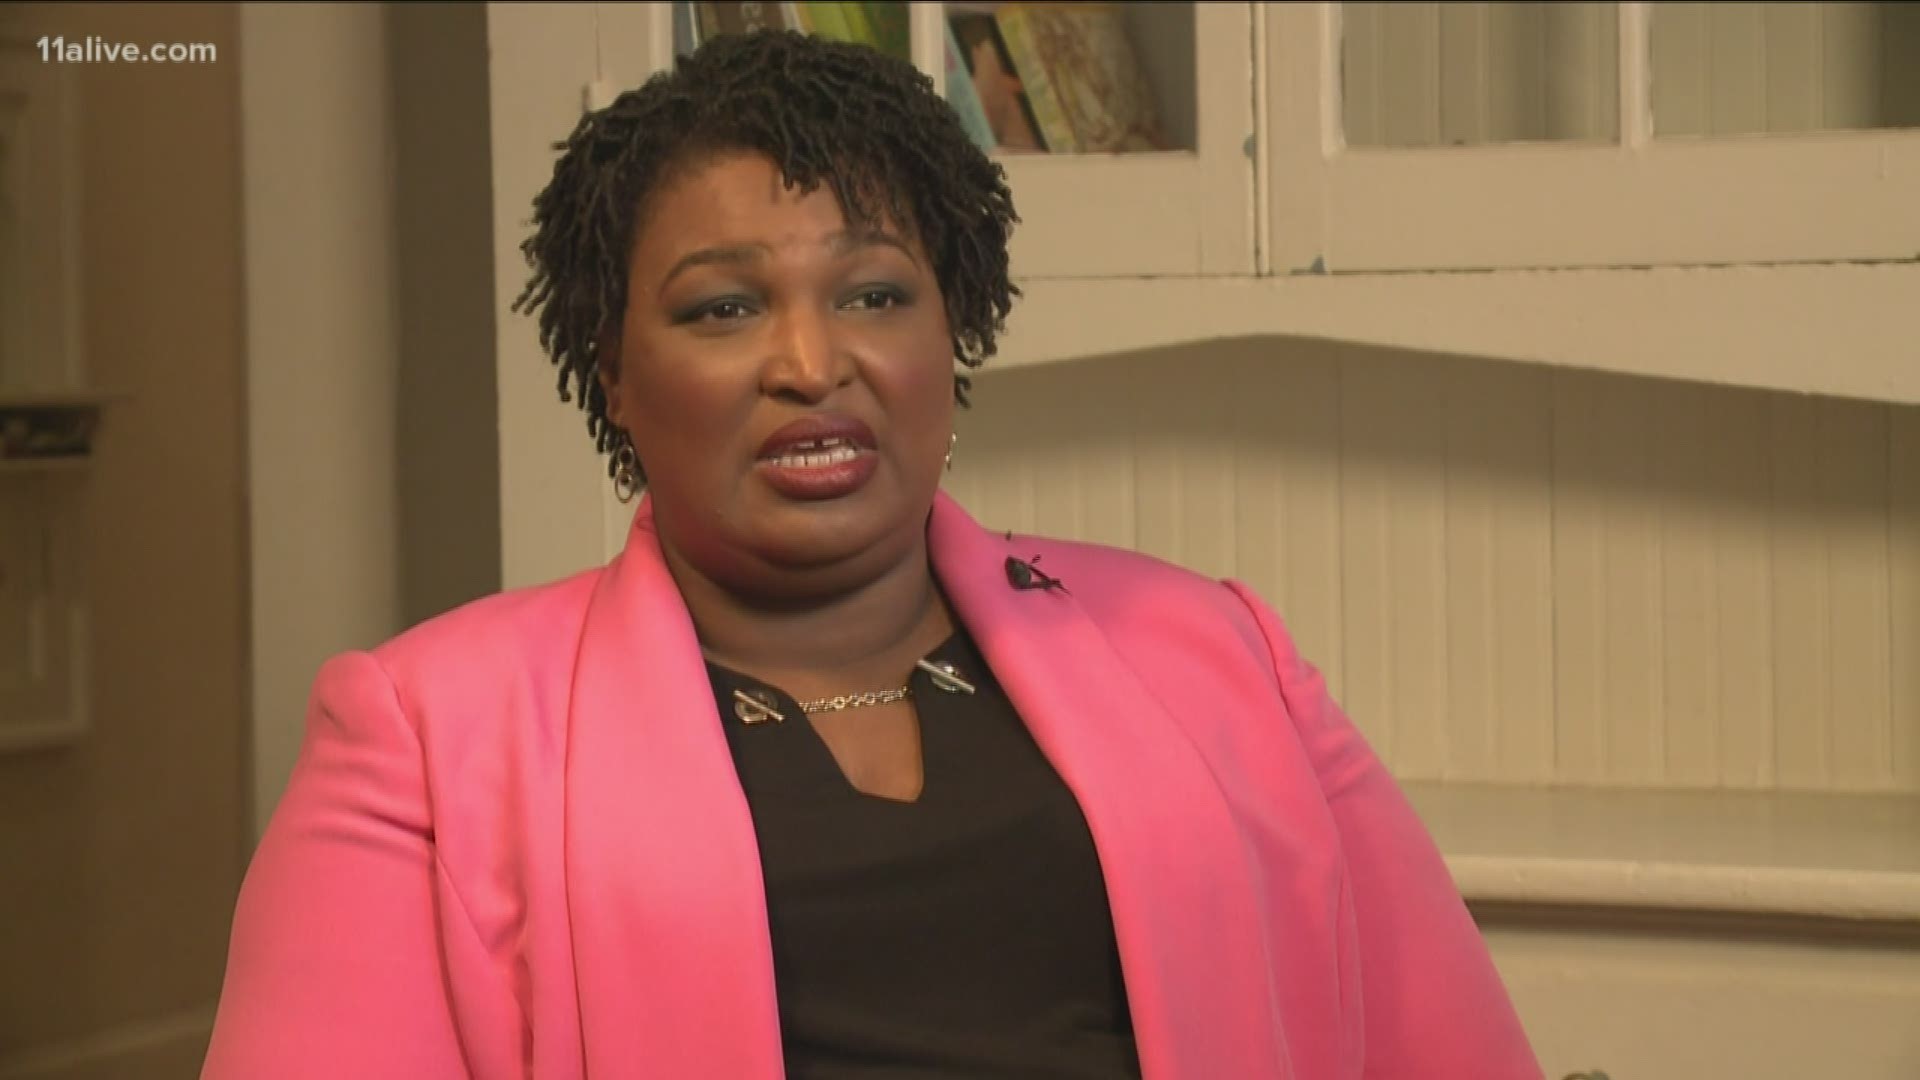 Stacey Abrams says she will not run for Senate in 202, but she's not counting out a run from president - just yet.